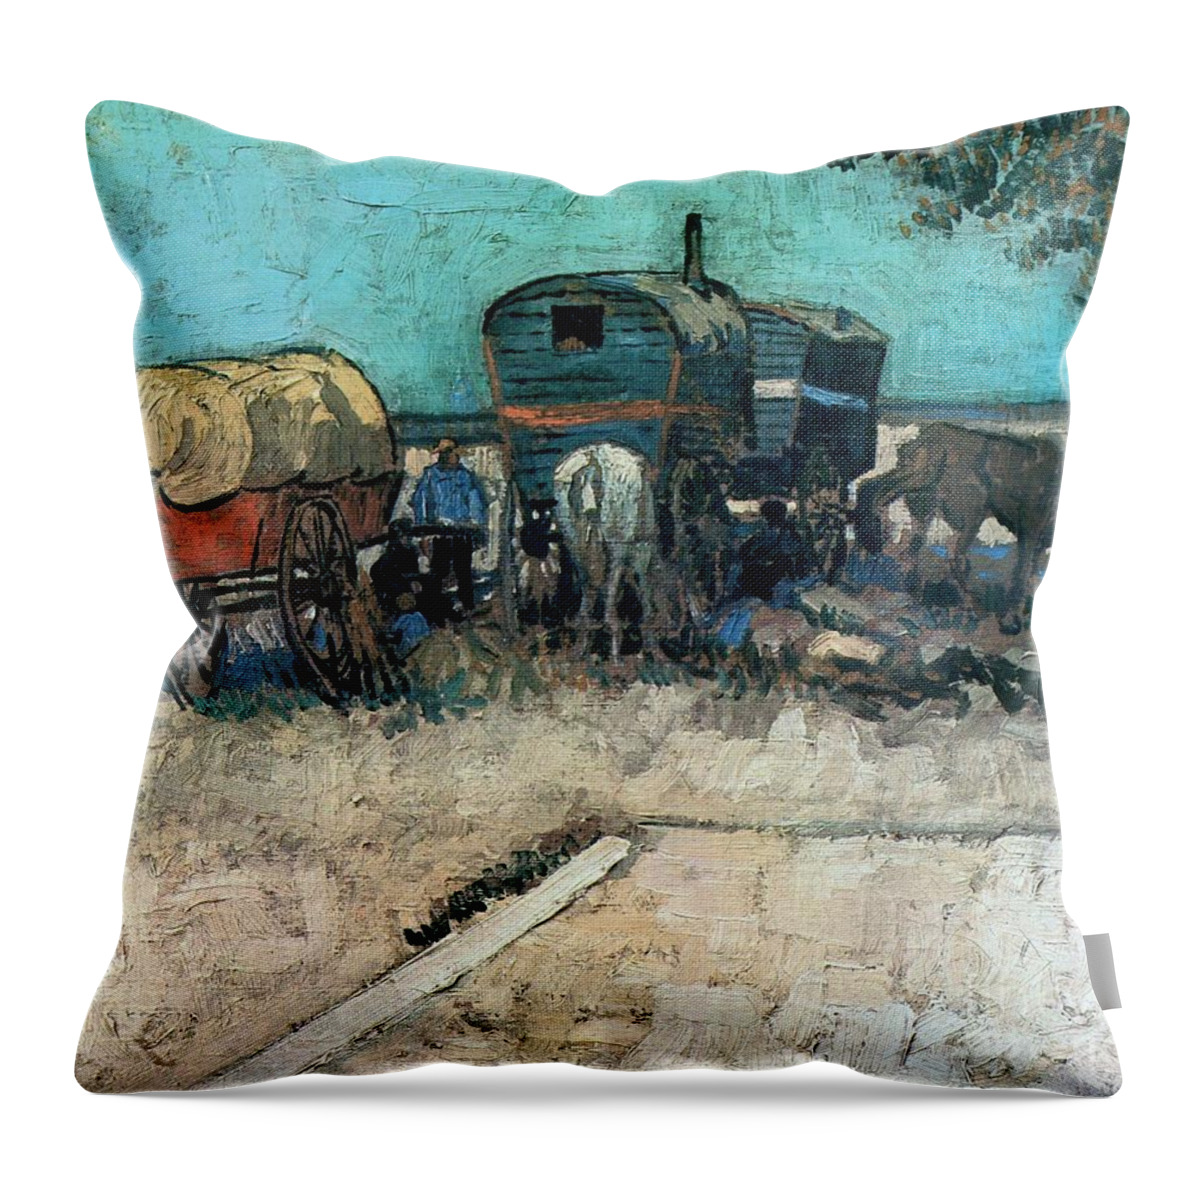 Gypsy Camp With Horse Carriage Throw Pillow featuring the painting Gypsy Camp With Horse Carriage by Celestial Images